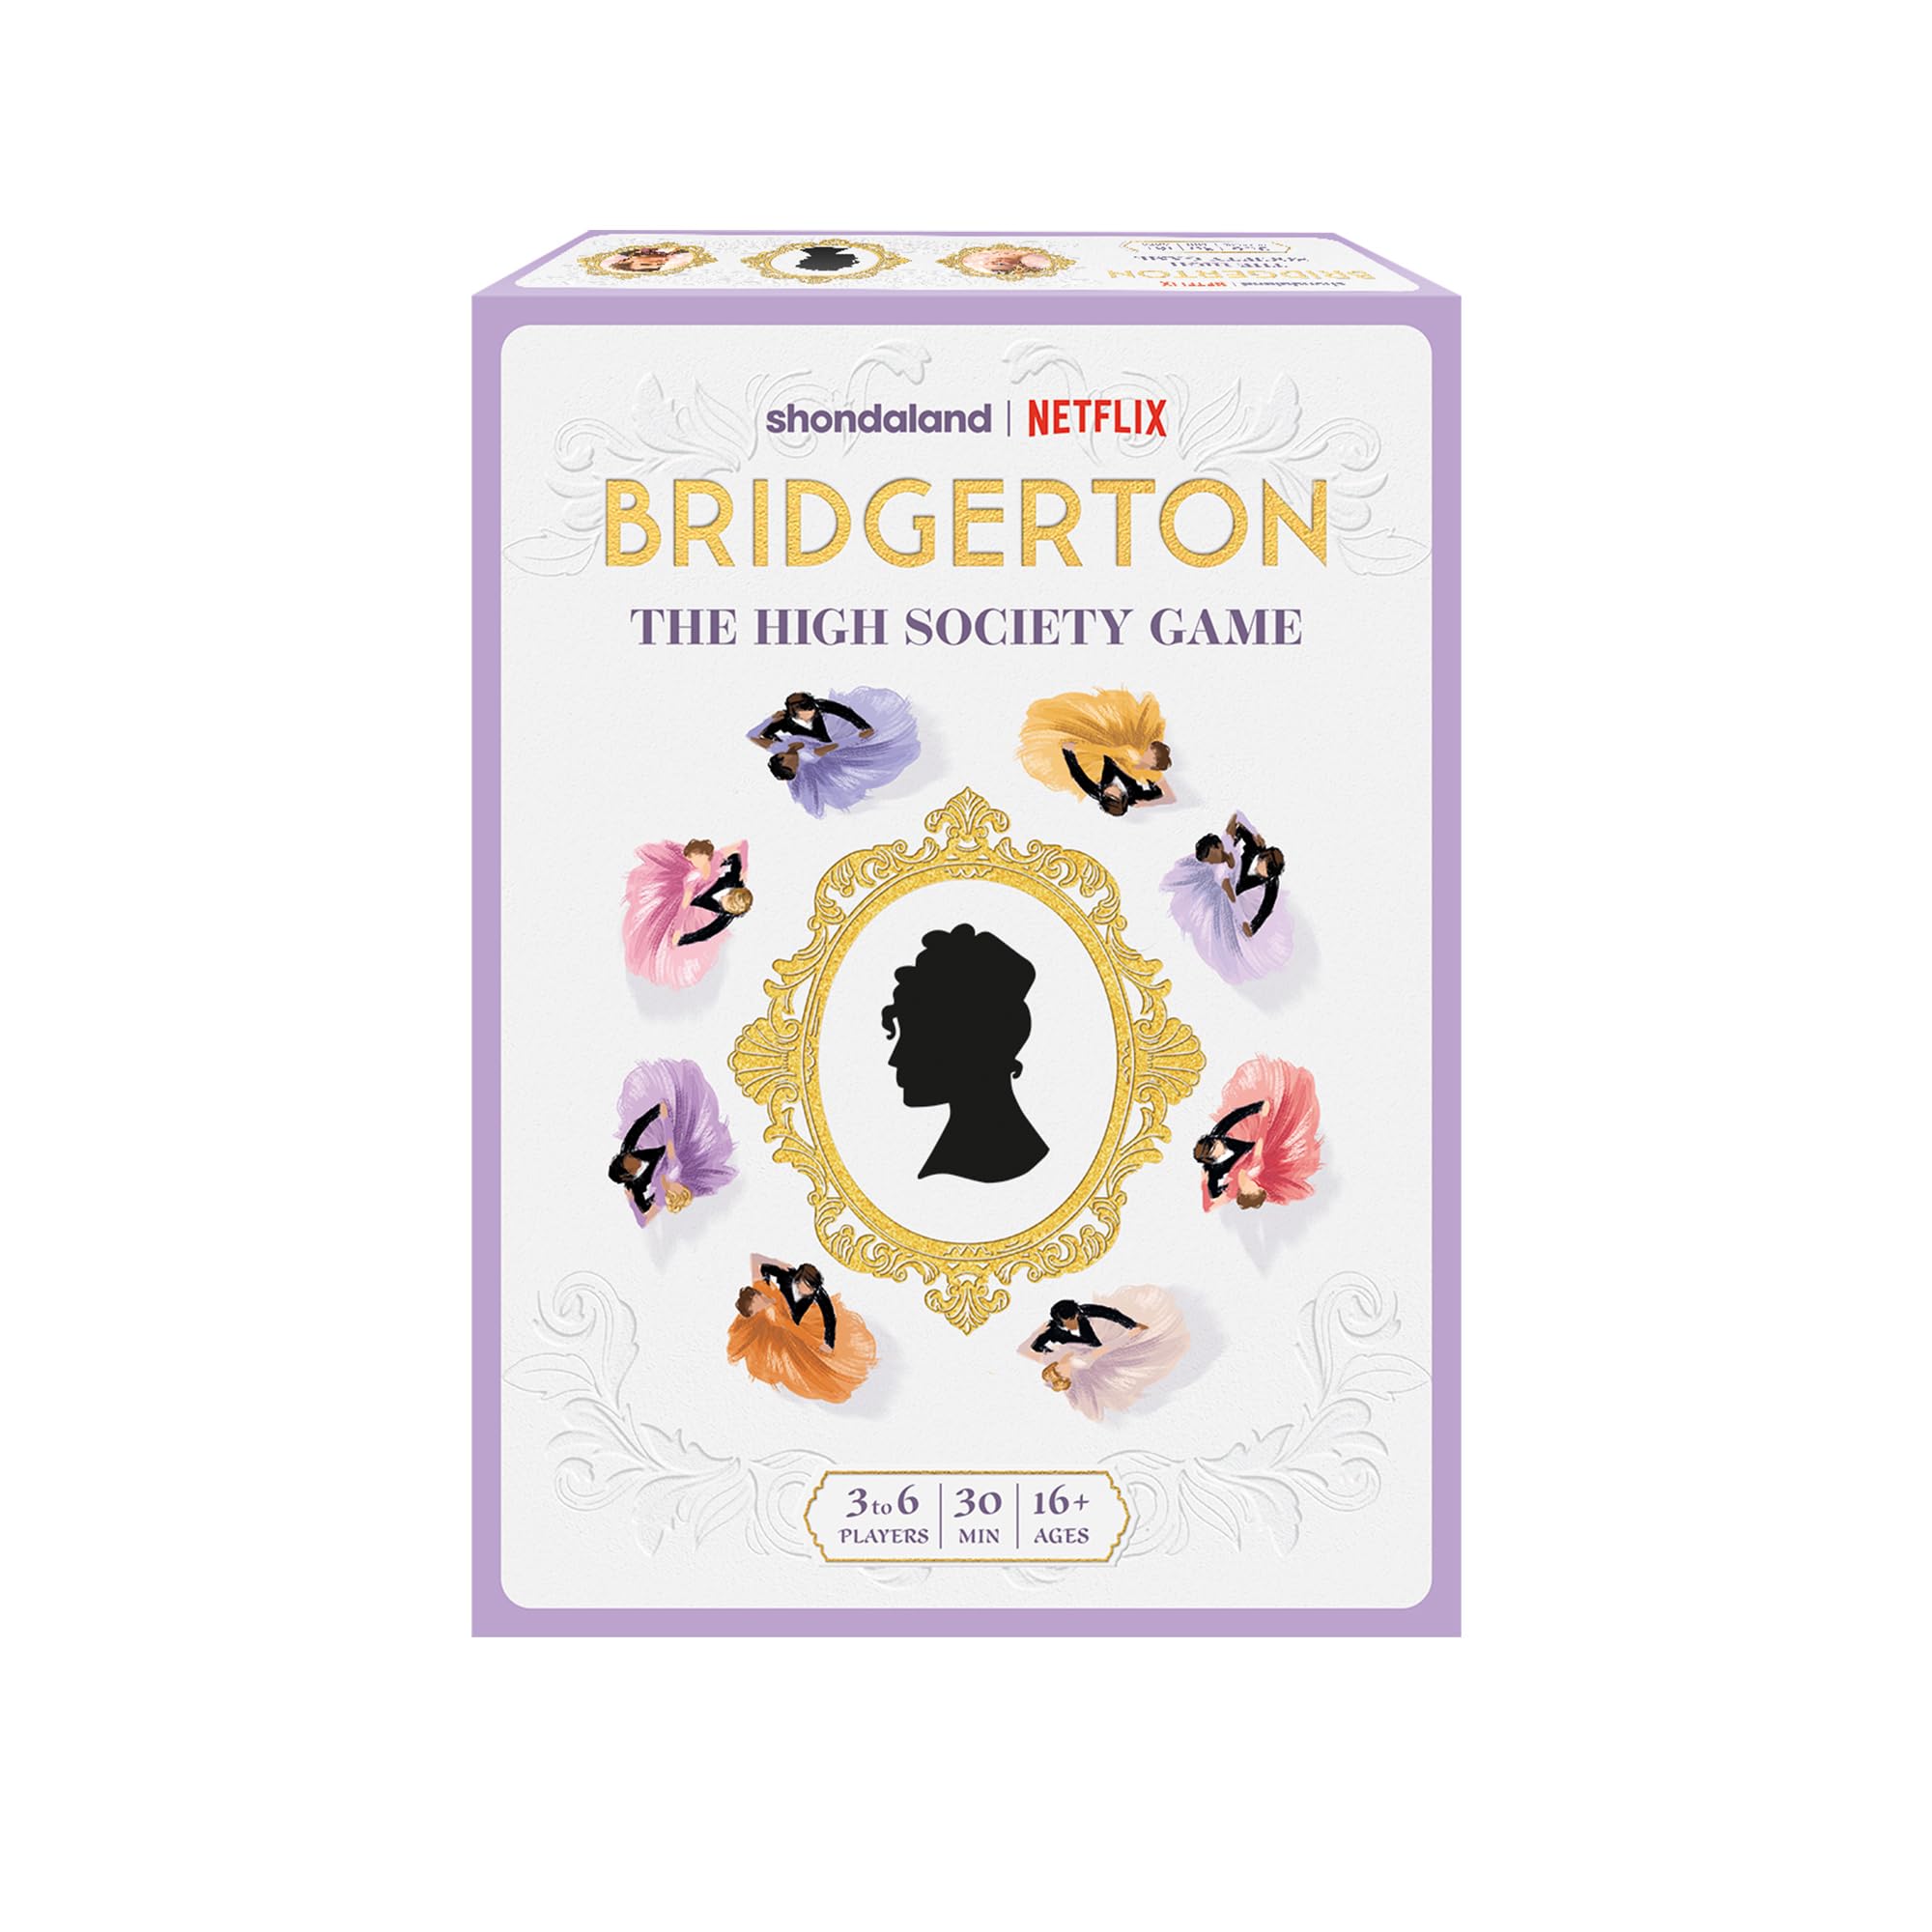 Bridgerton The High Society Board Game - Strategy Game Based on The Hit Netflix TV Series, Fun Game for Adult Game Night, Ages 16+, 3-6 Players, 30 Minute Playtime, Made by Mixlore